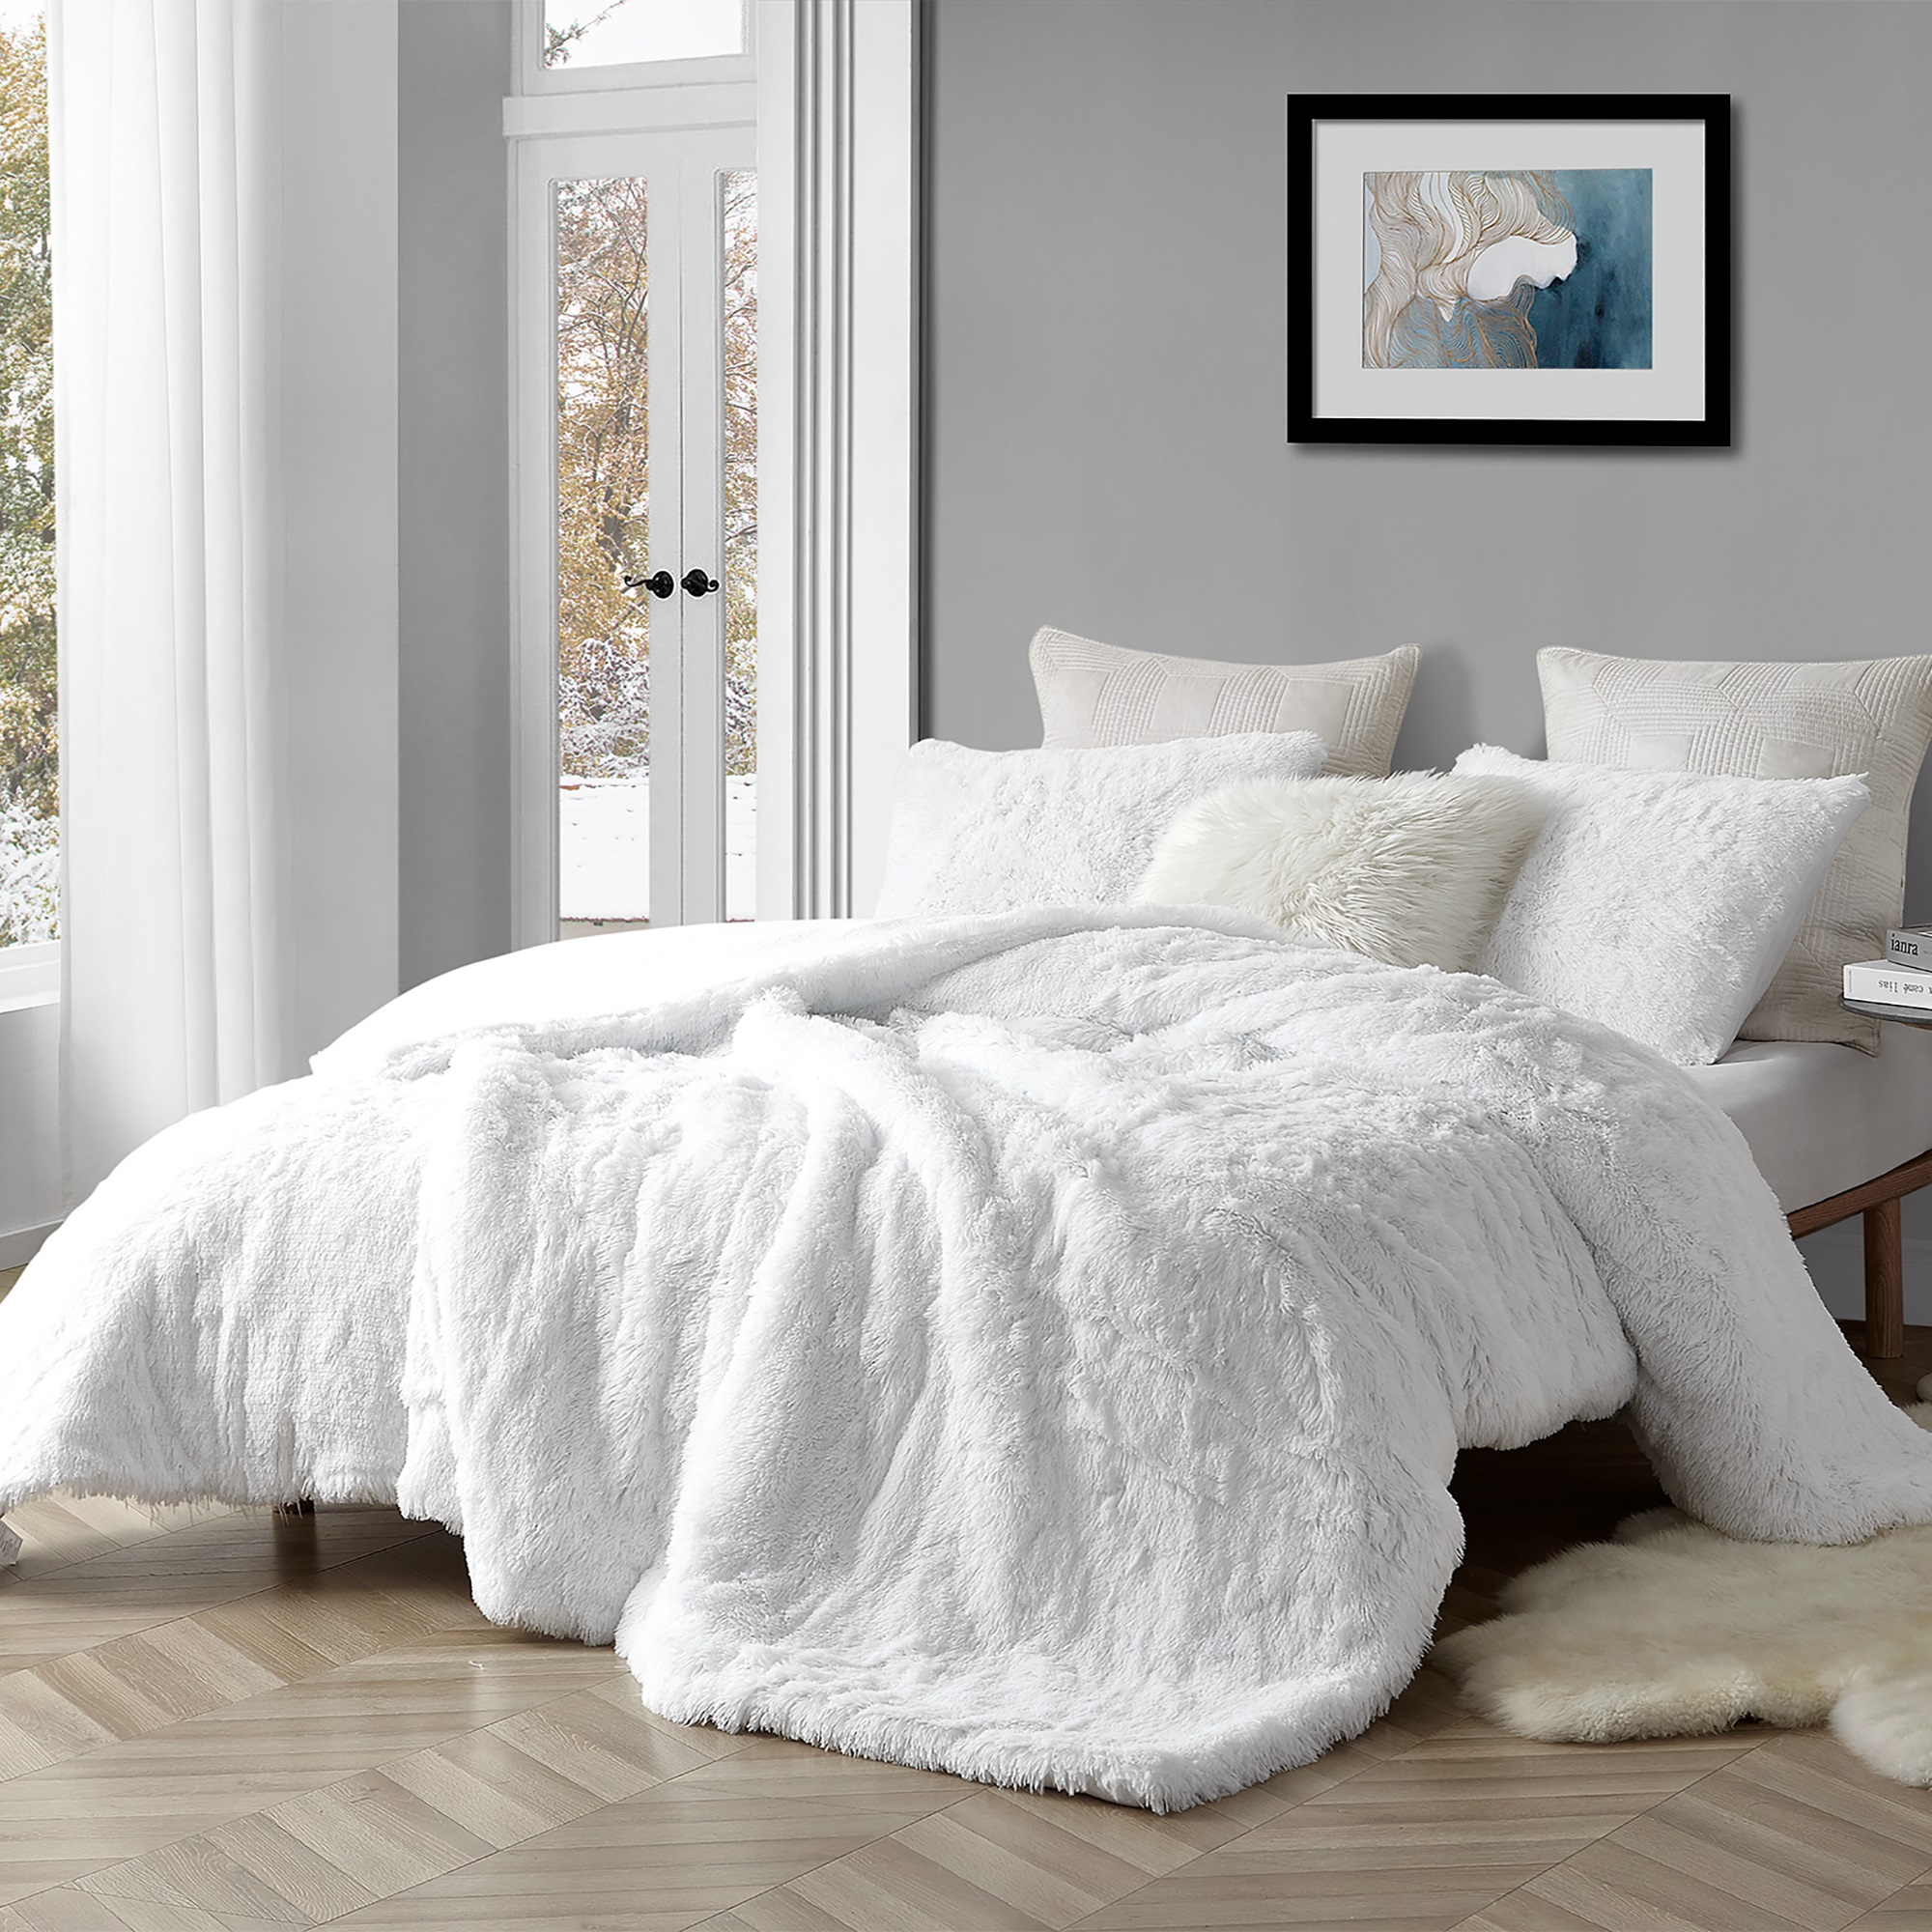 Coma Inducer Oversized Comforter - Are You Kidding? - White